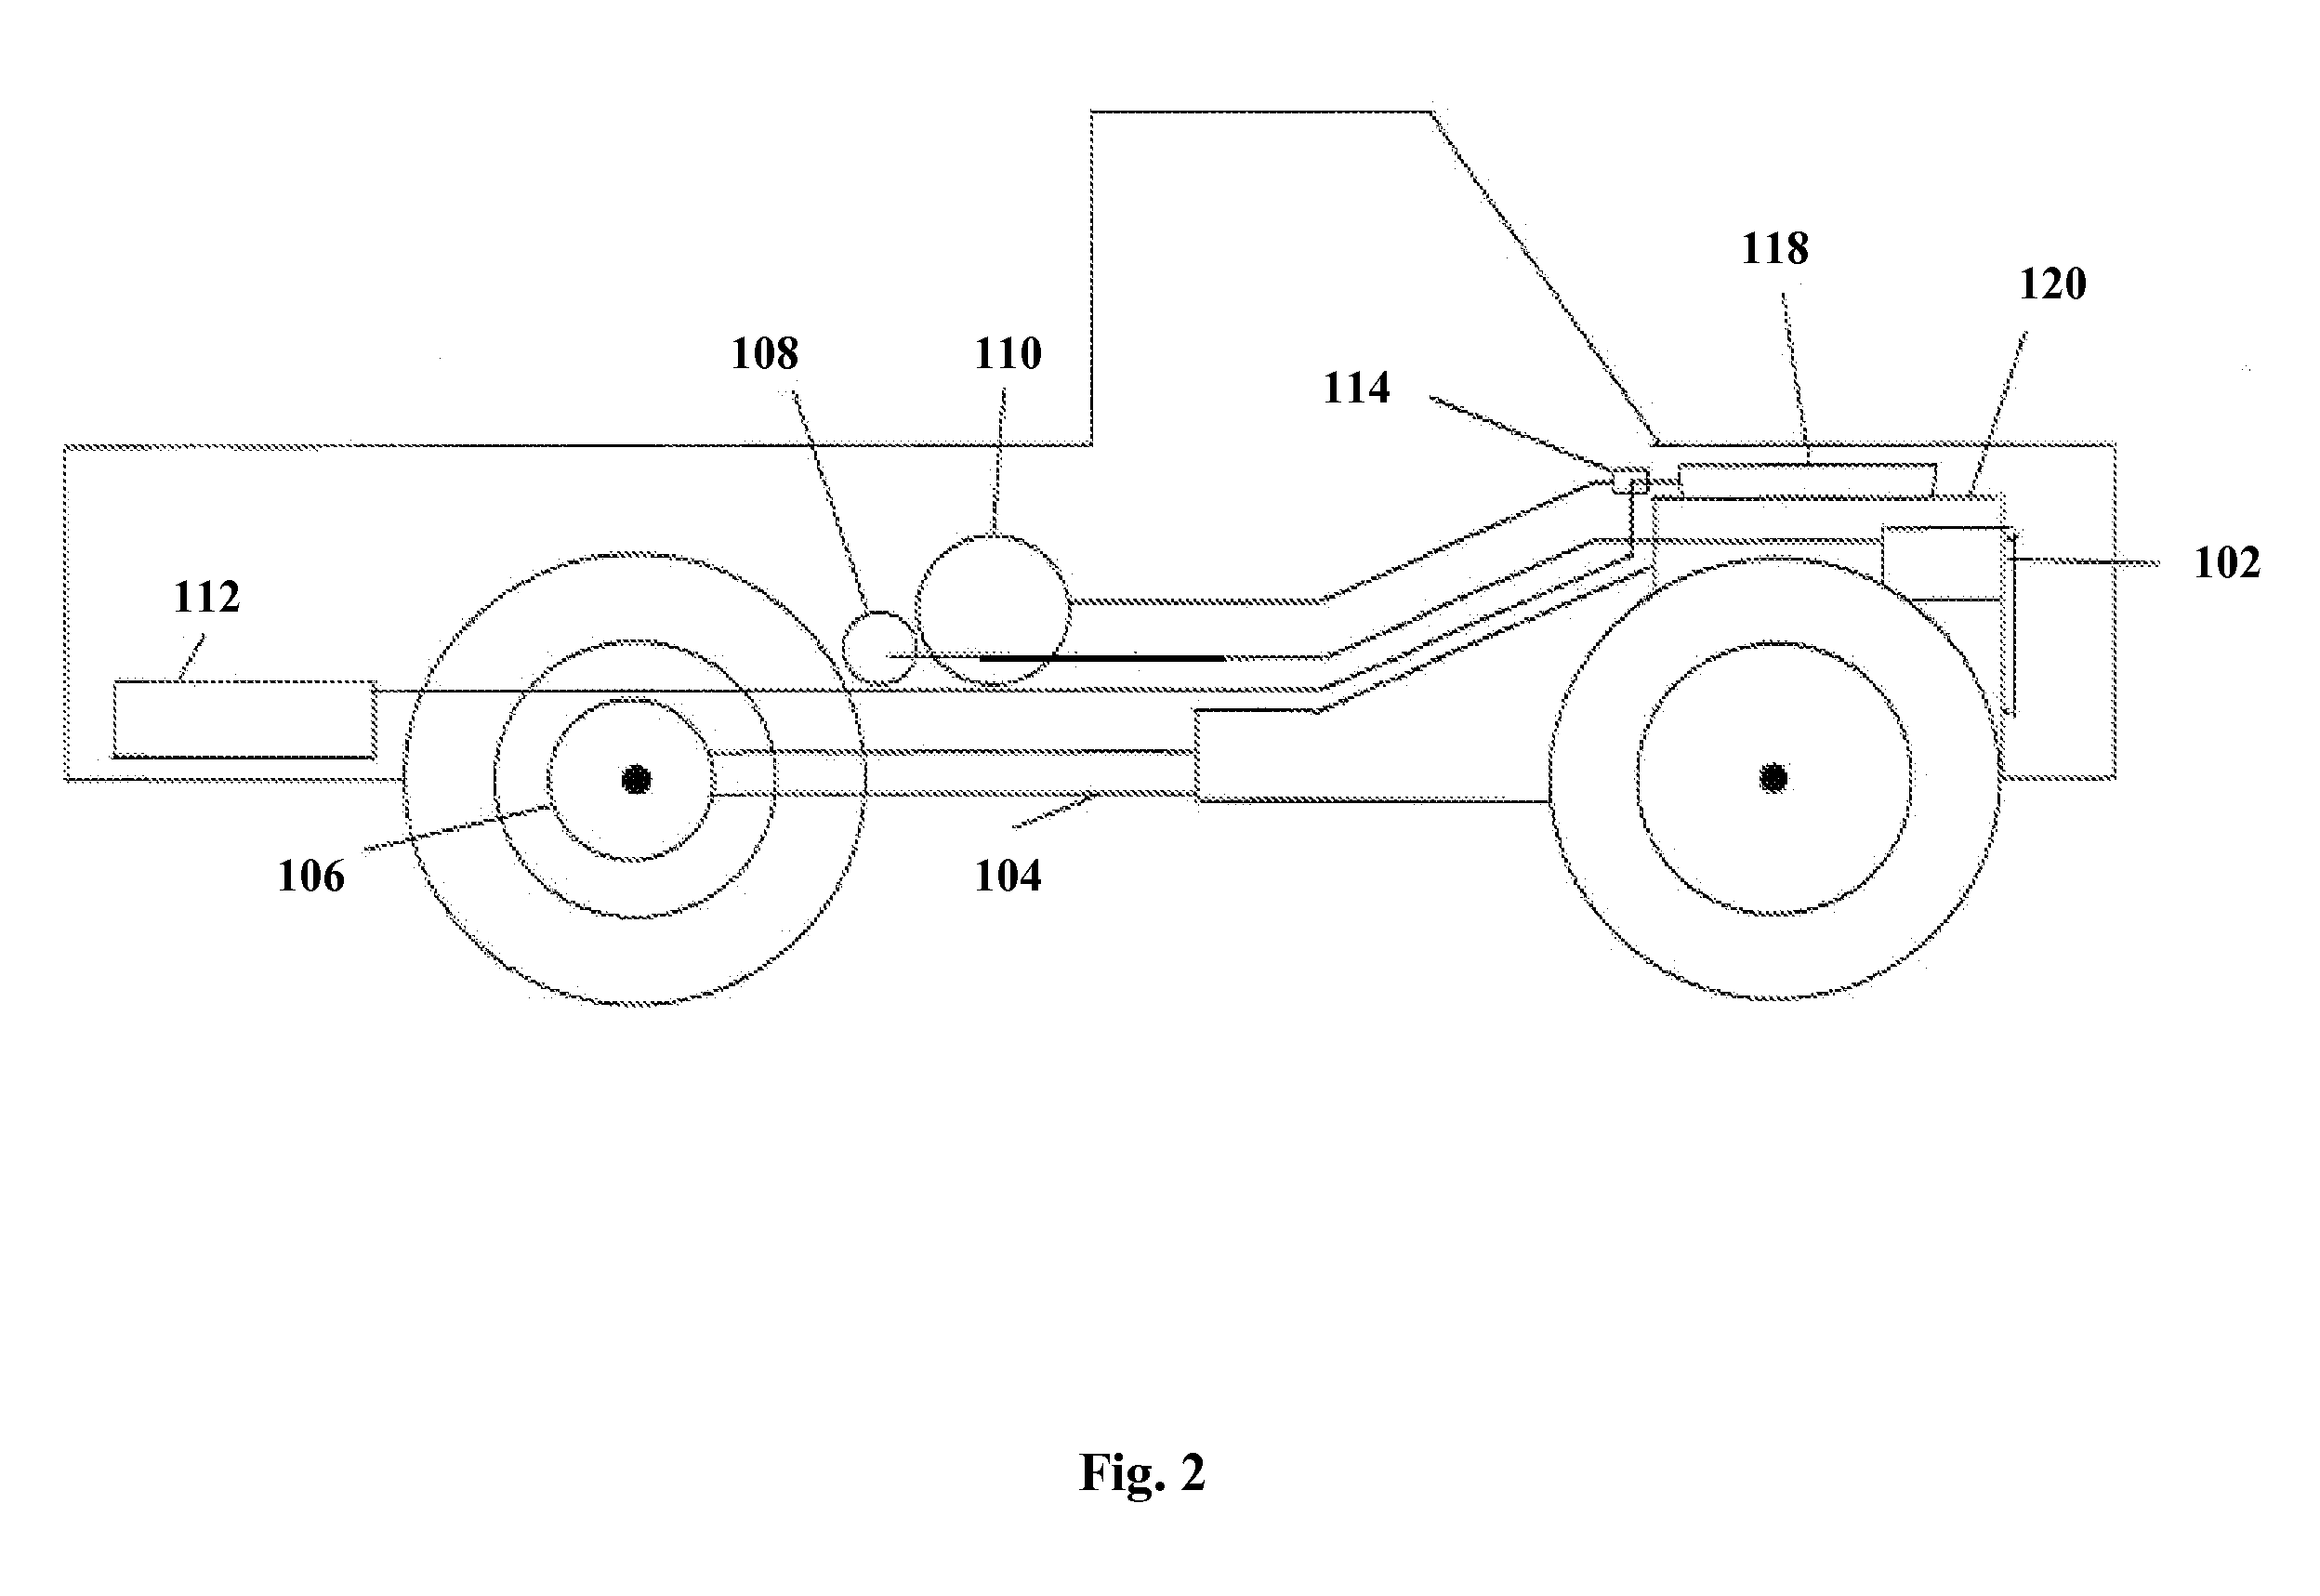 Energy conversion system for hydrogen generation and uses thereof